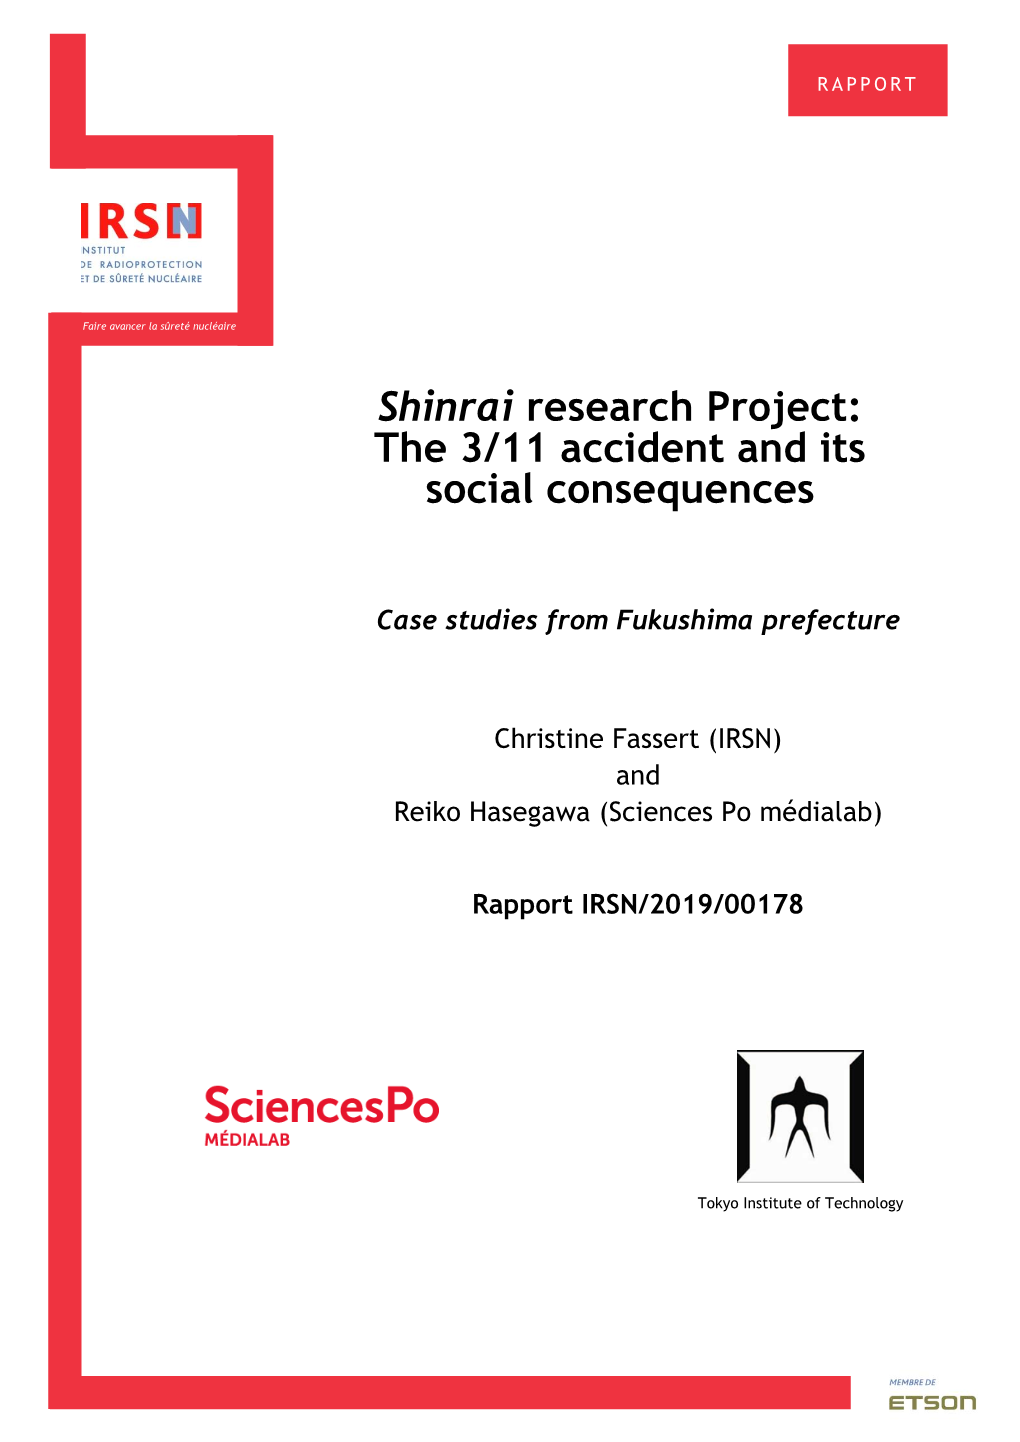 Shinrai Research Project: the 3/11 Accident and Its Social Consequences